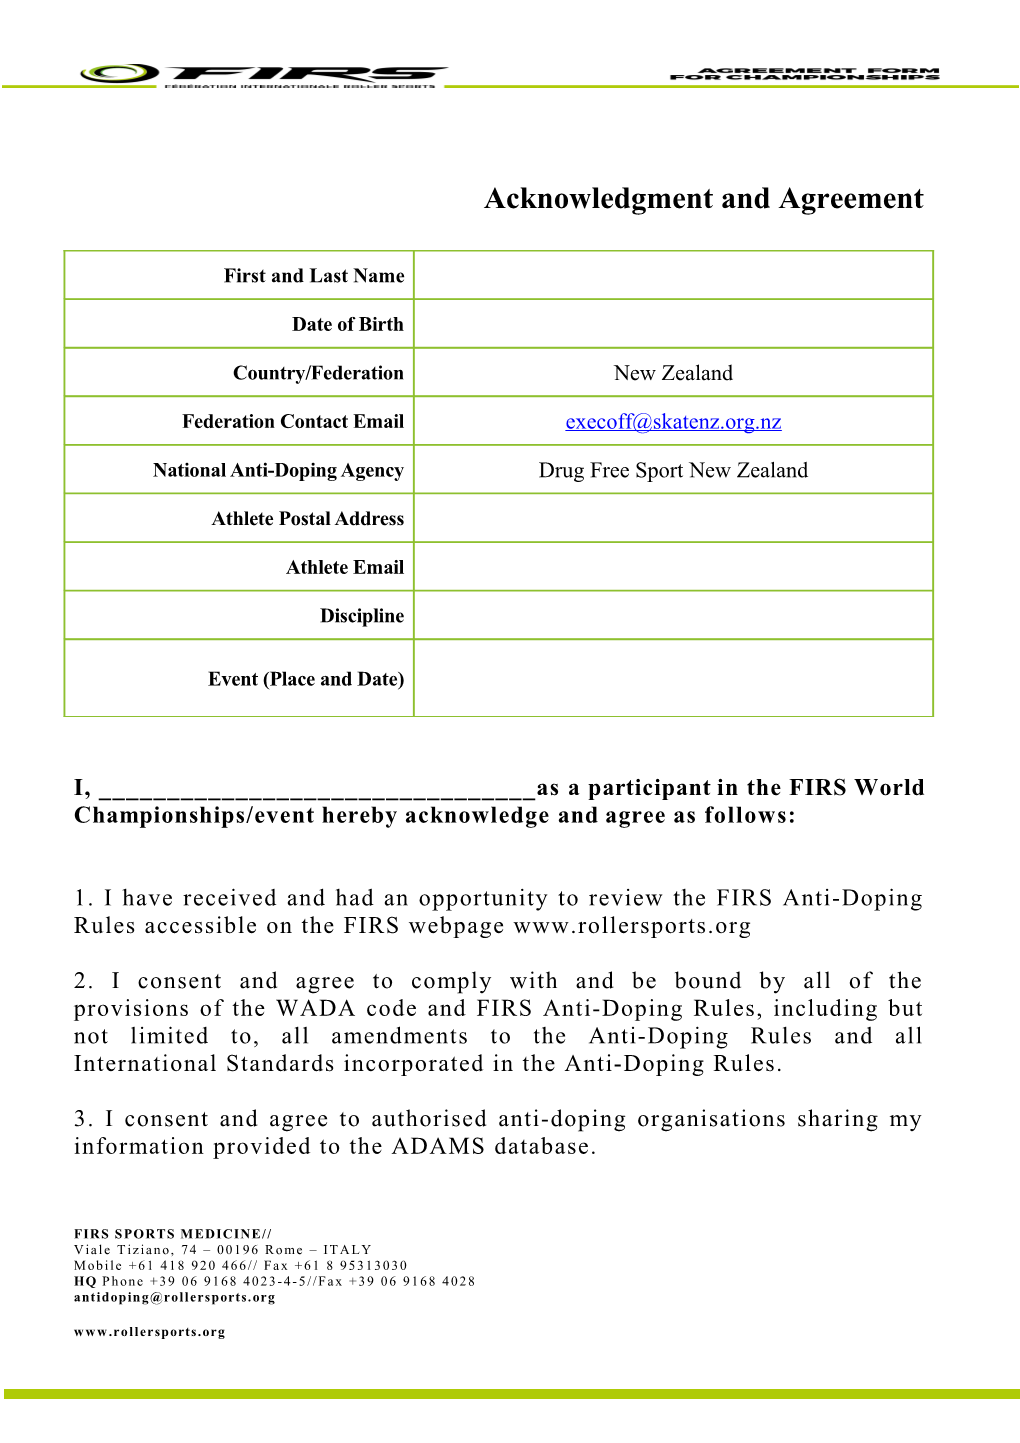 I, ______As a Participant in the FIRS World Championships/Event Hereby Acknowledge And